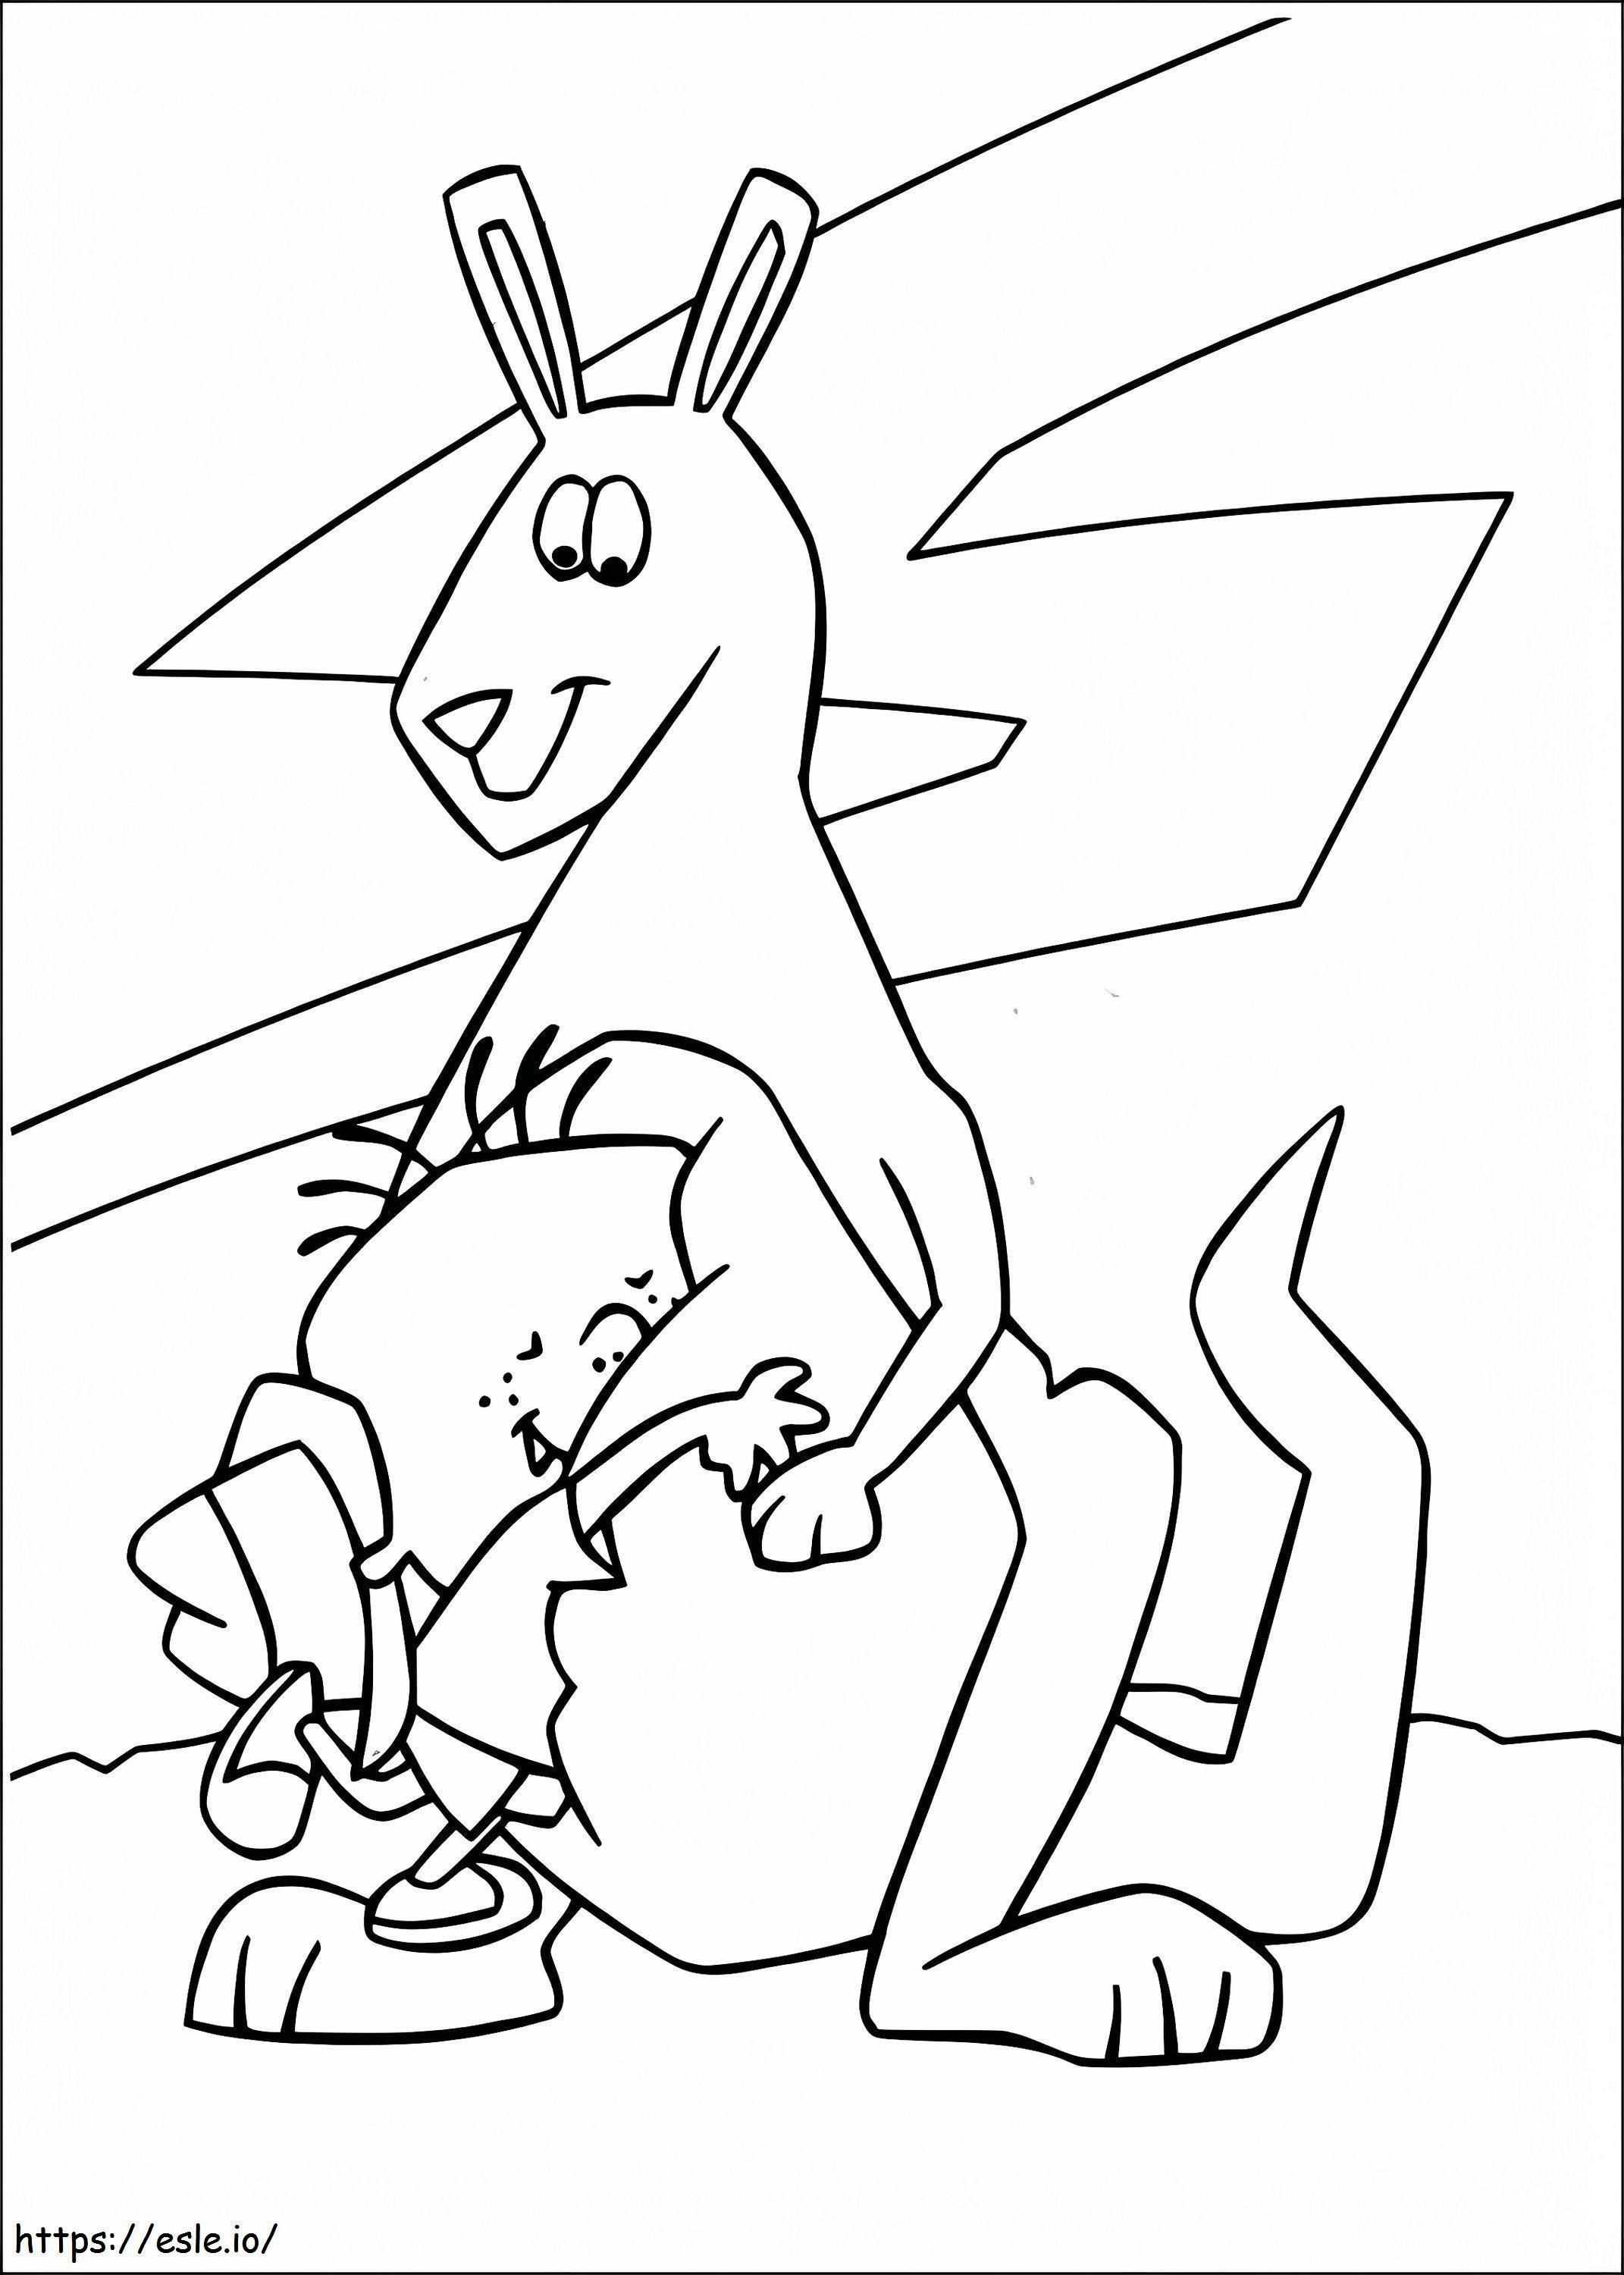 Stanley And Kangaroo coloring page